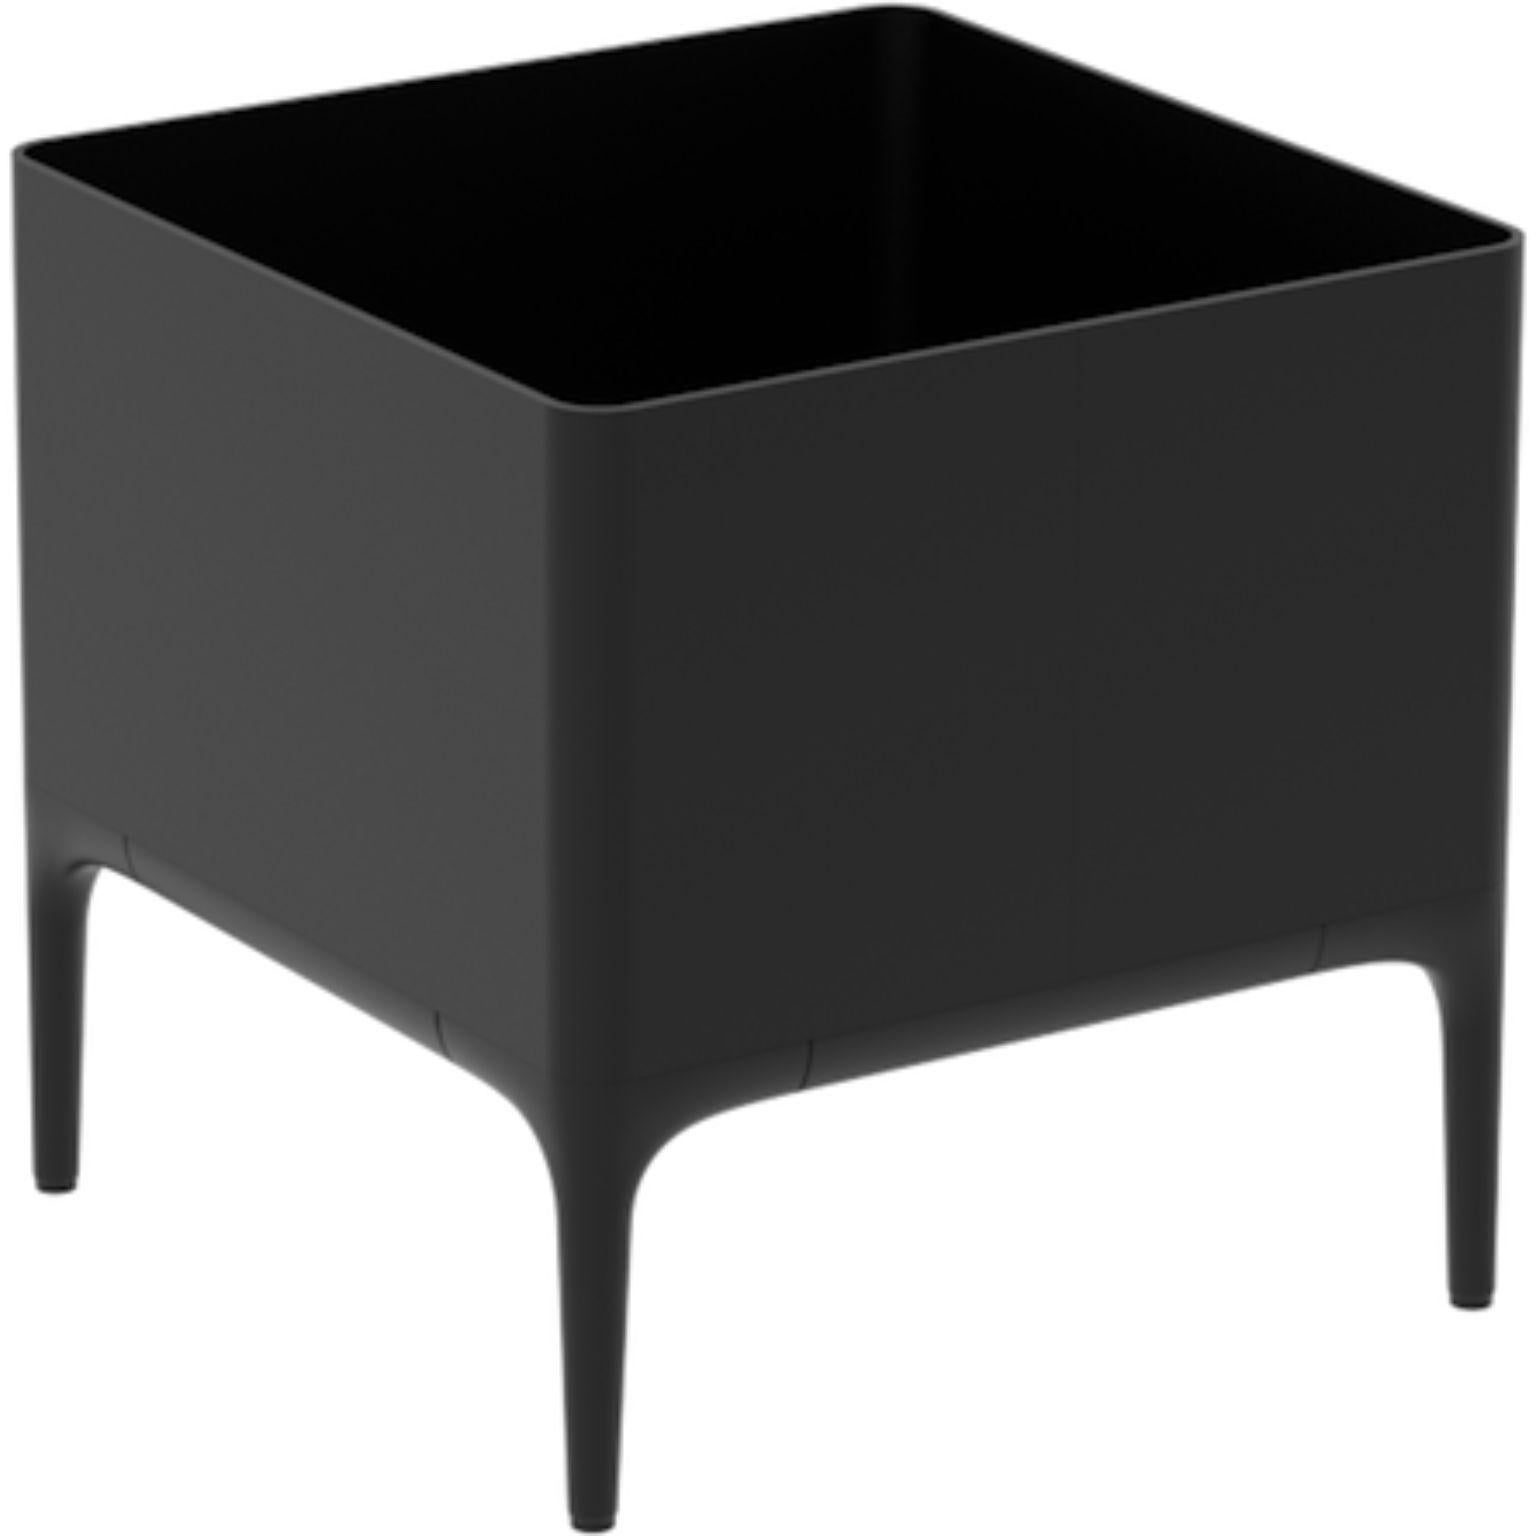 Xaloc black 45 pot by MOWEE
Dimensions: D45 x W45 x H45 cm
Material: aluminium
Weight: 8 kg
Also available in different colours and finishes. 

 Xaloc synthesizes the lines of interior furniture to extrapolate to the exterior, creating an